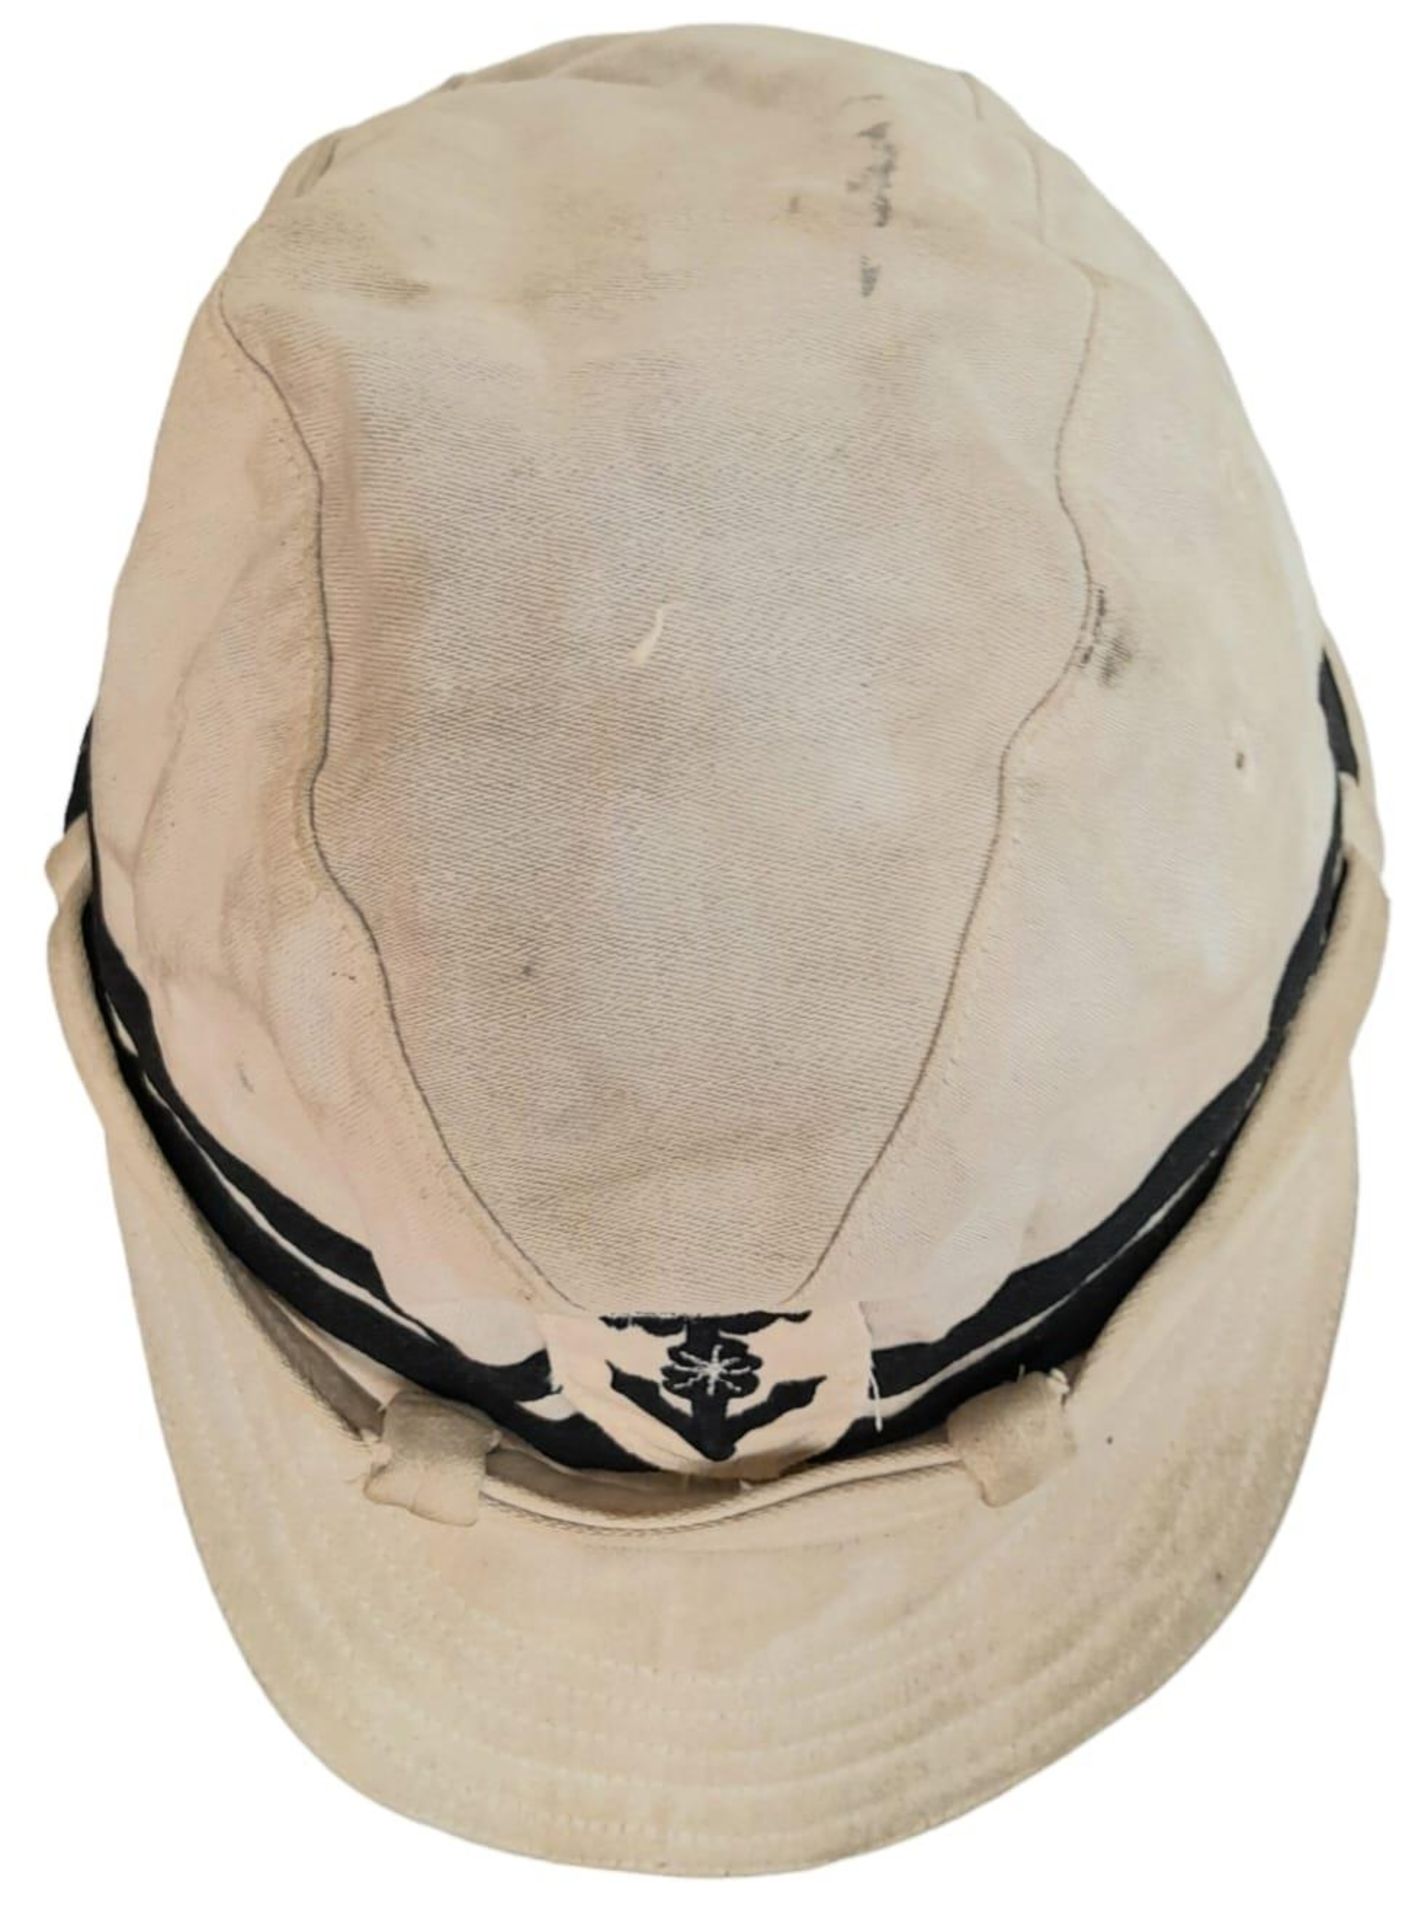 WW2 Japanese Naval Officers Tropical Shore Cap. - Image 3 of 5